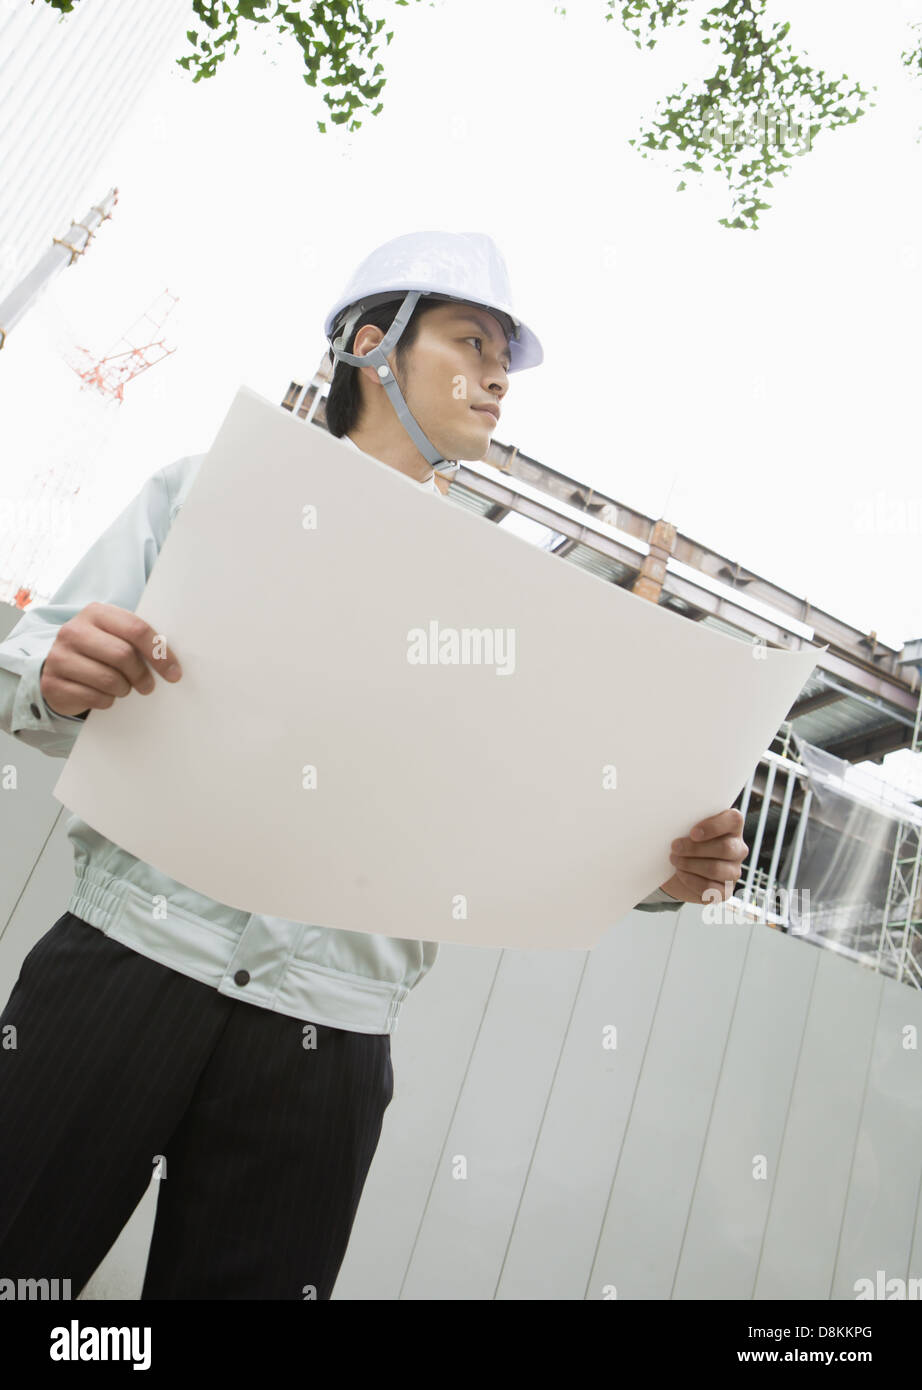 Construction worker Stock Photo